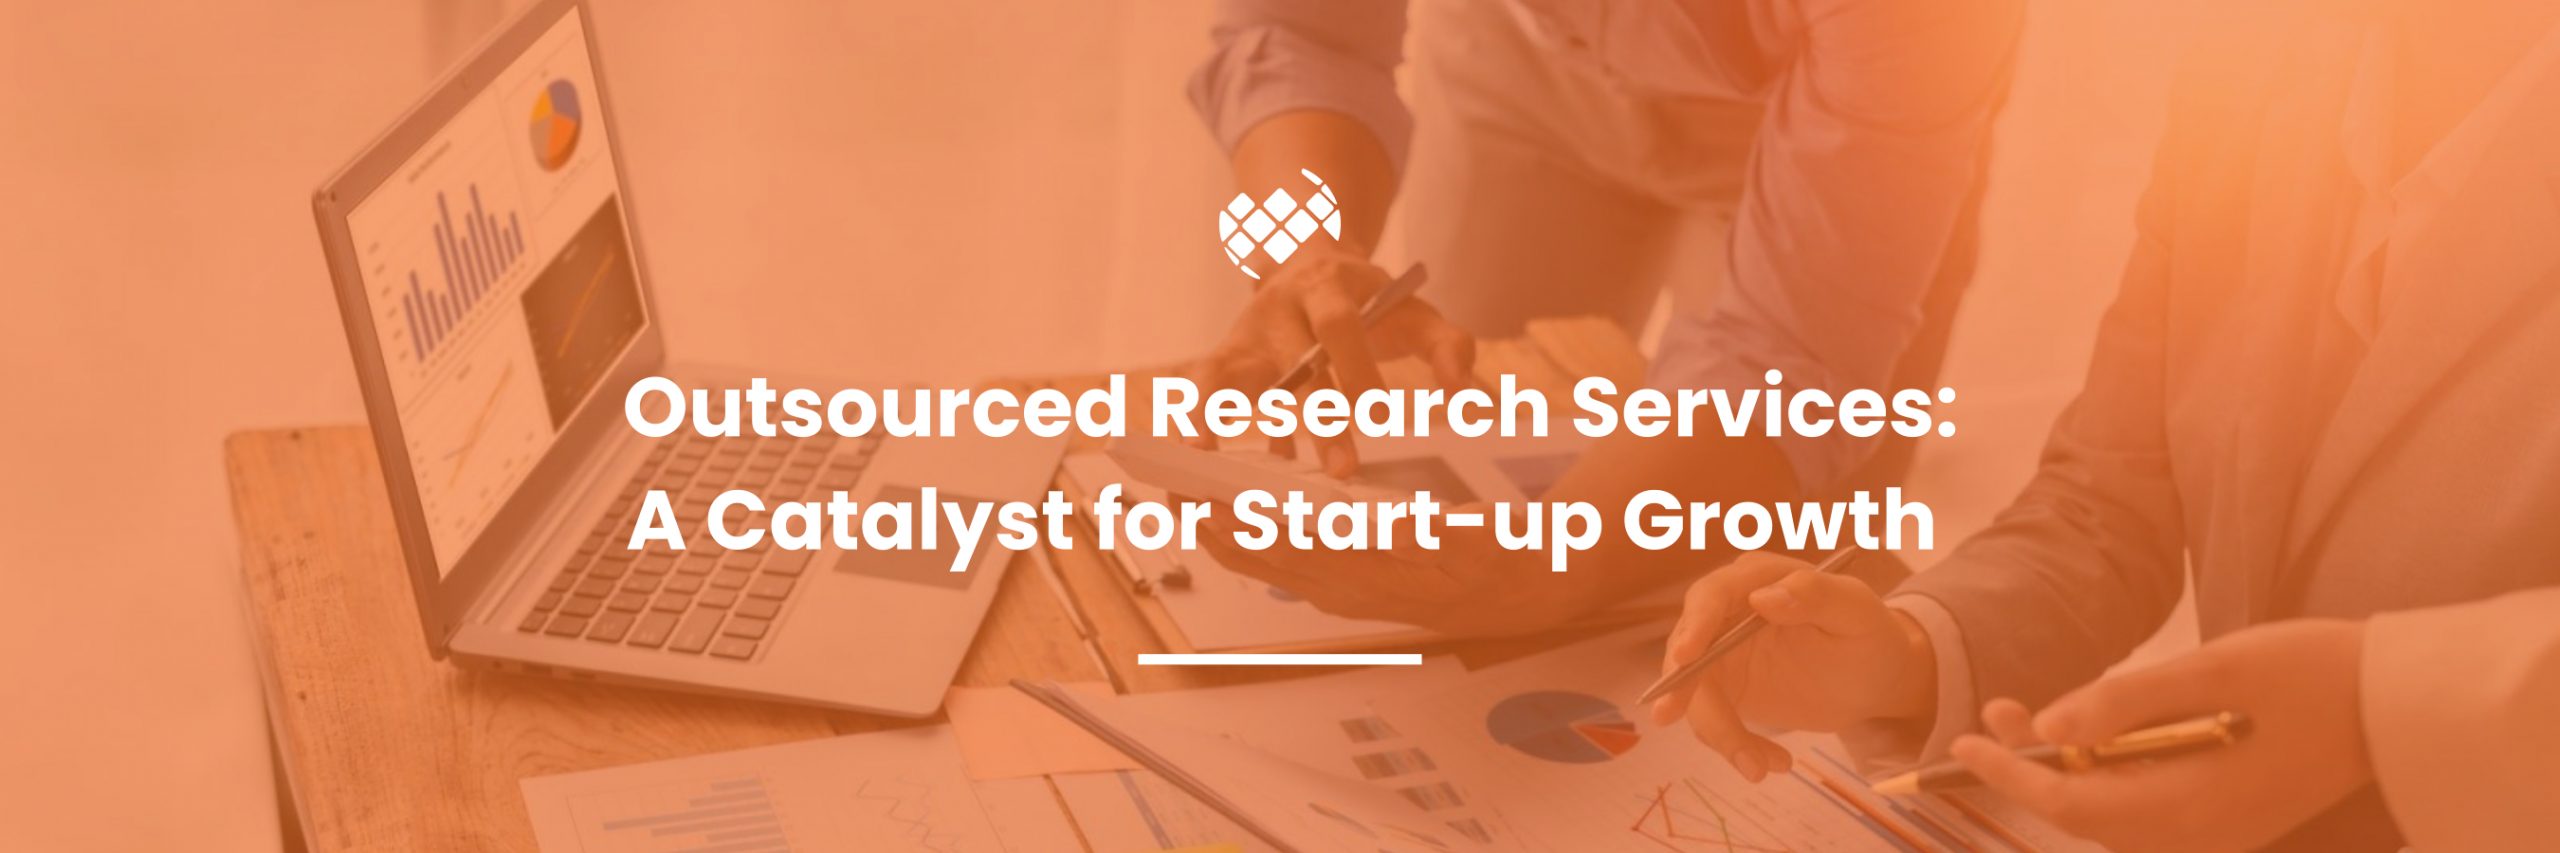 Outsourced Research Services